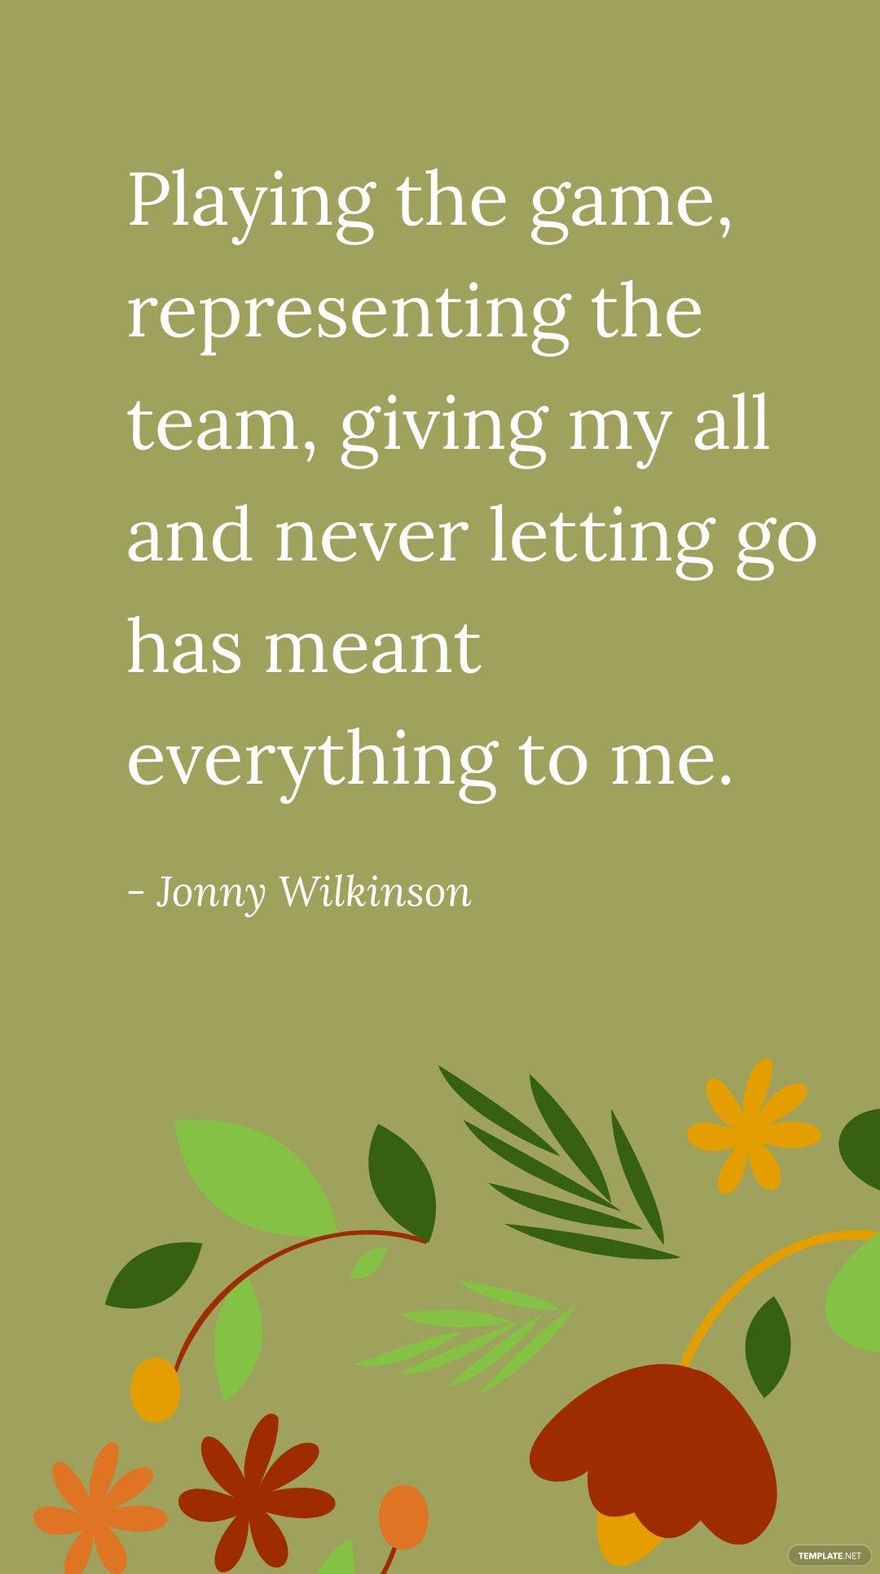 Free Jonny Wilkinson - Playing the game, representing the team, giving my all and never letting go has meant everything to me.